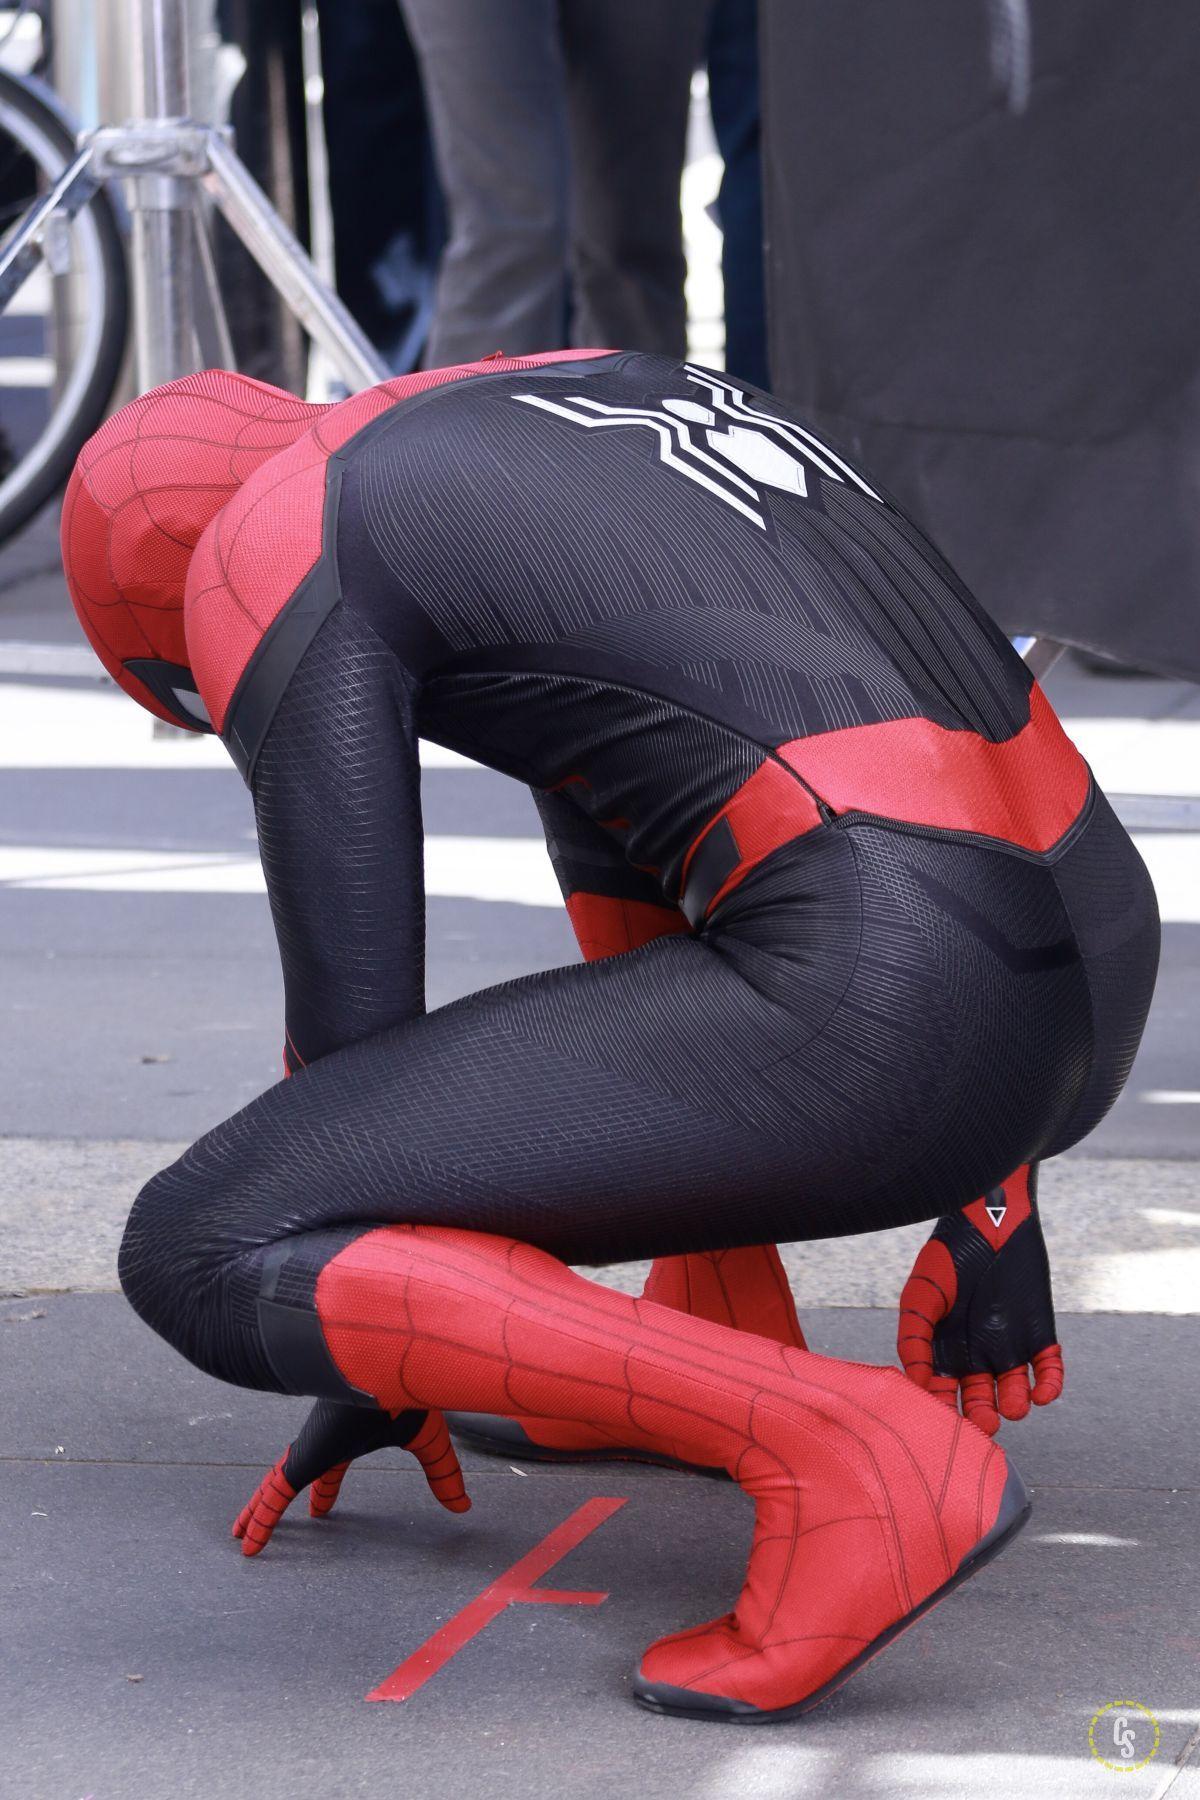 More Photo Of New Spider Man Suit From Far From Home!